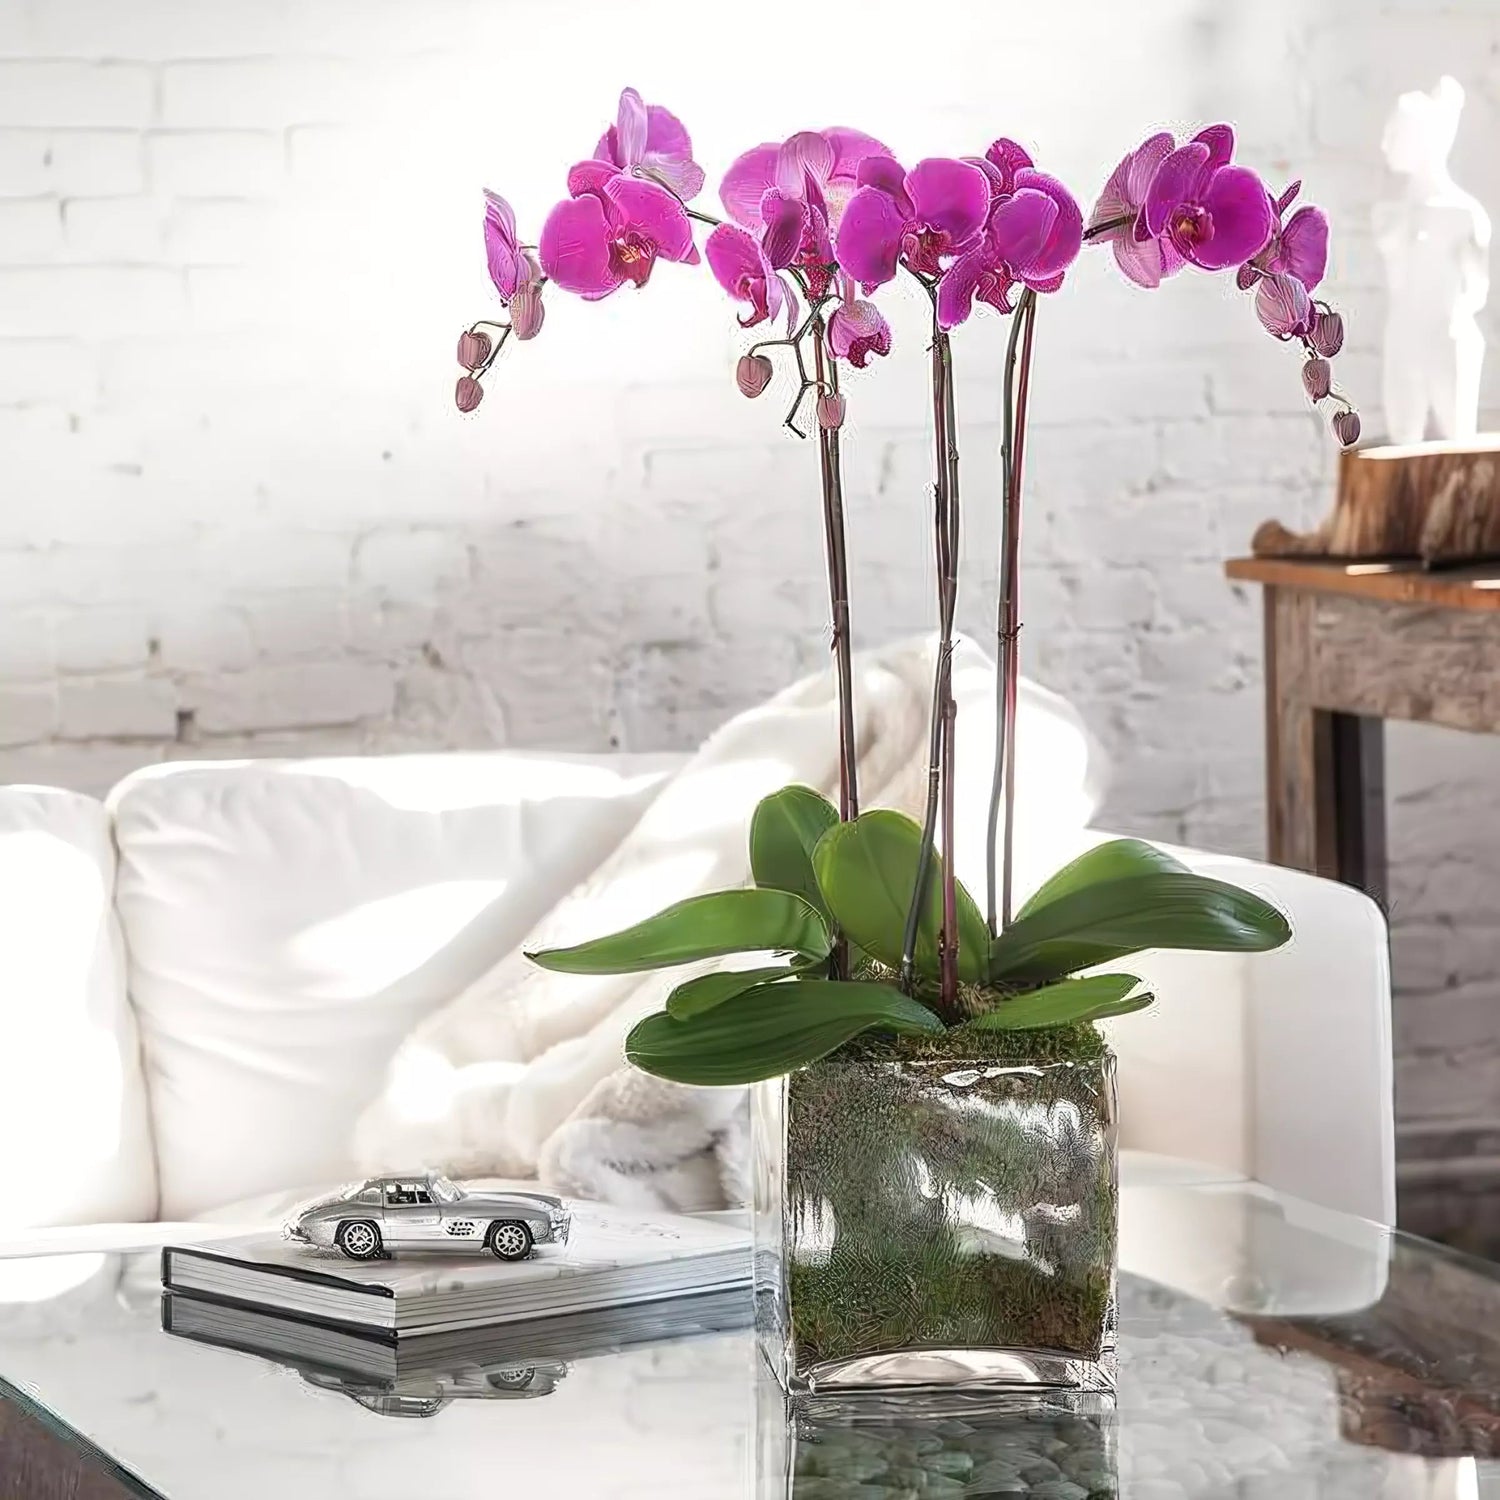 Phalaenopsis Orchid Plants - Flower Delivery NYC